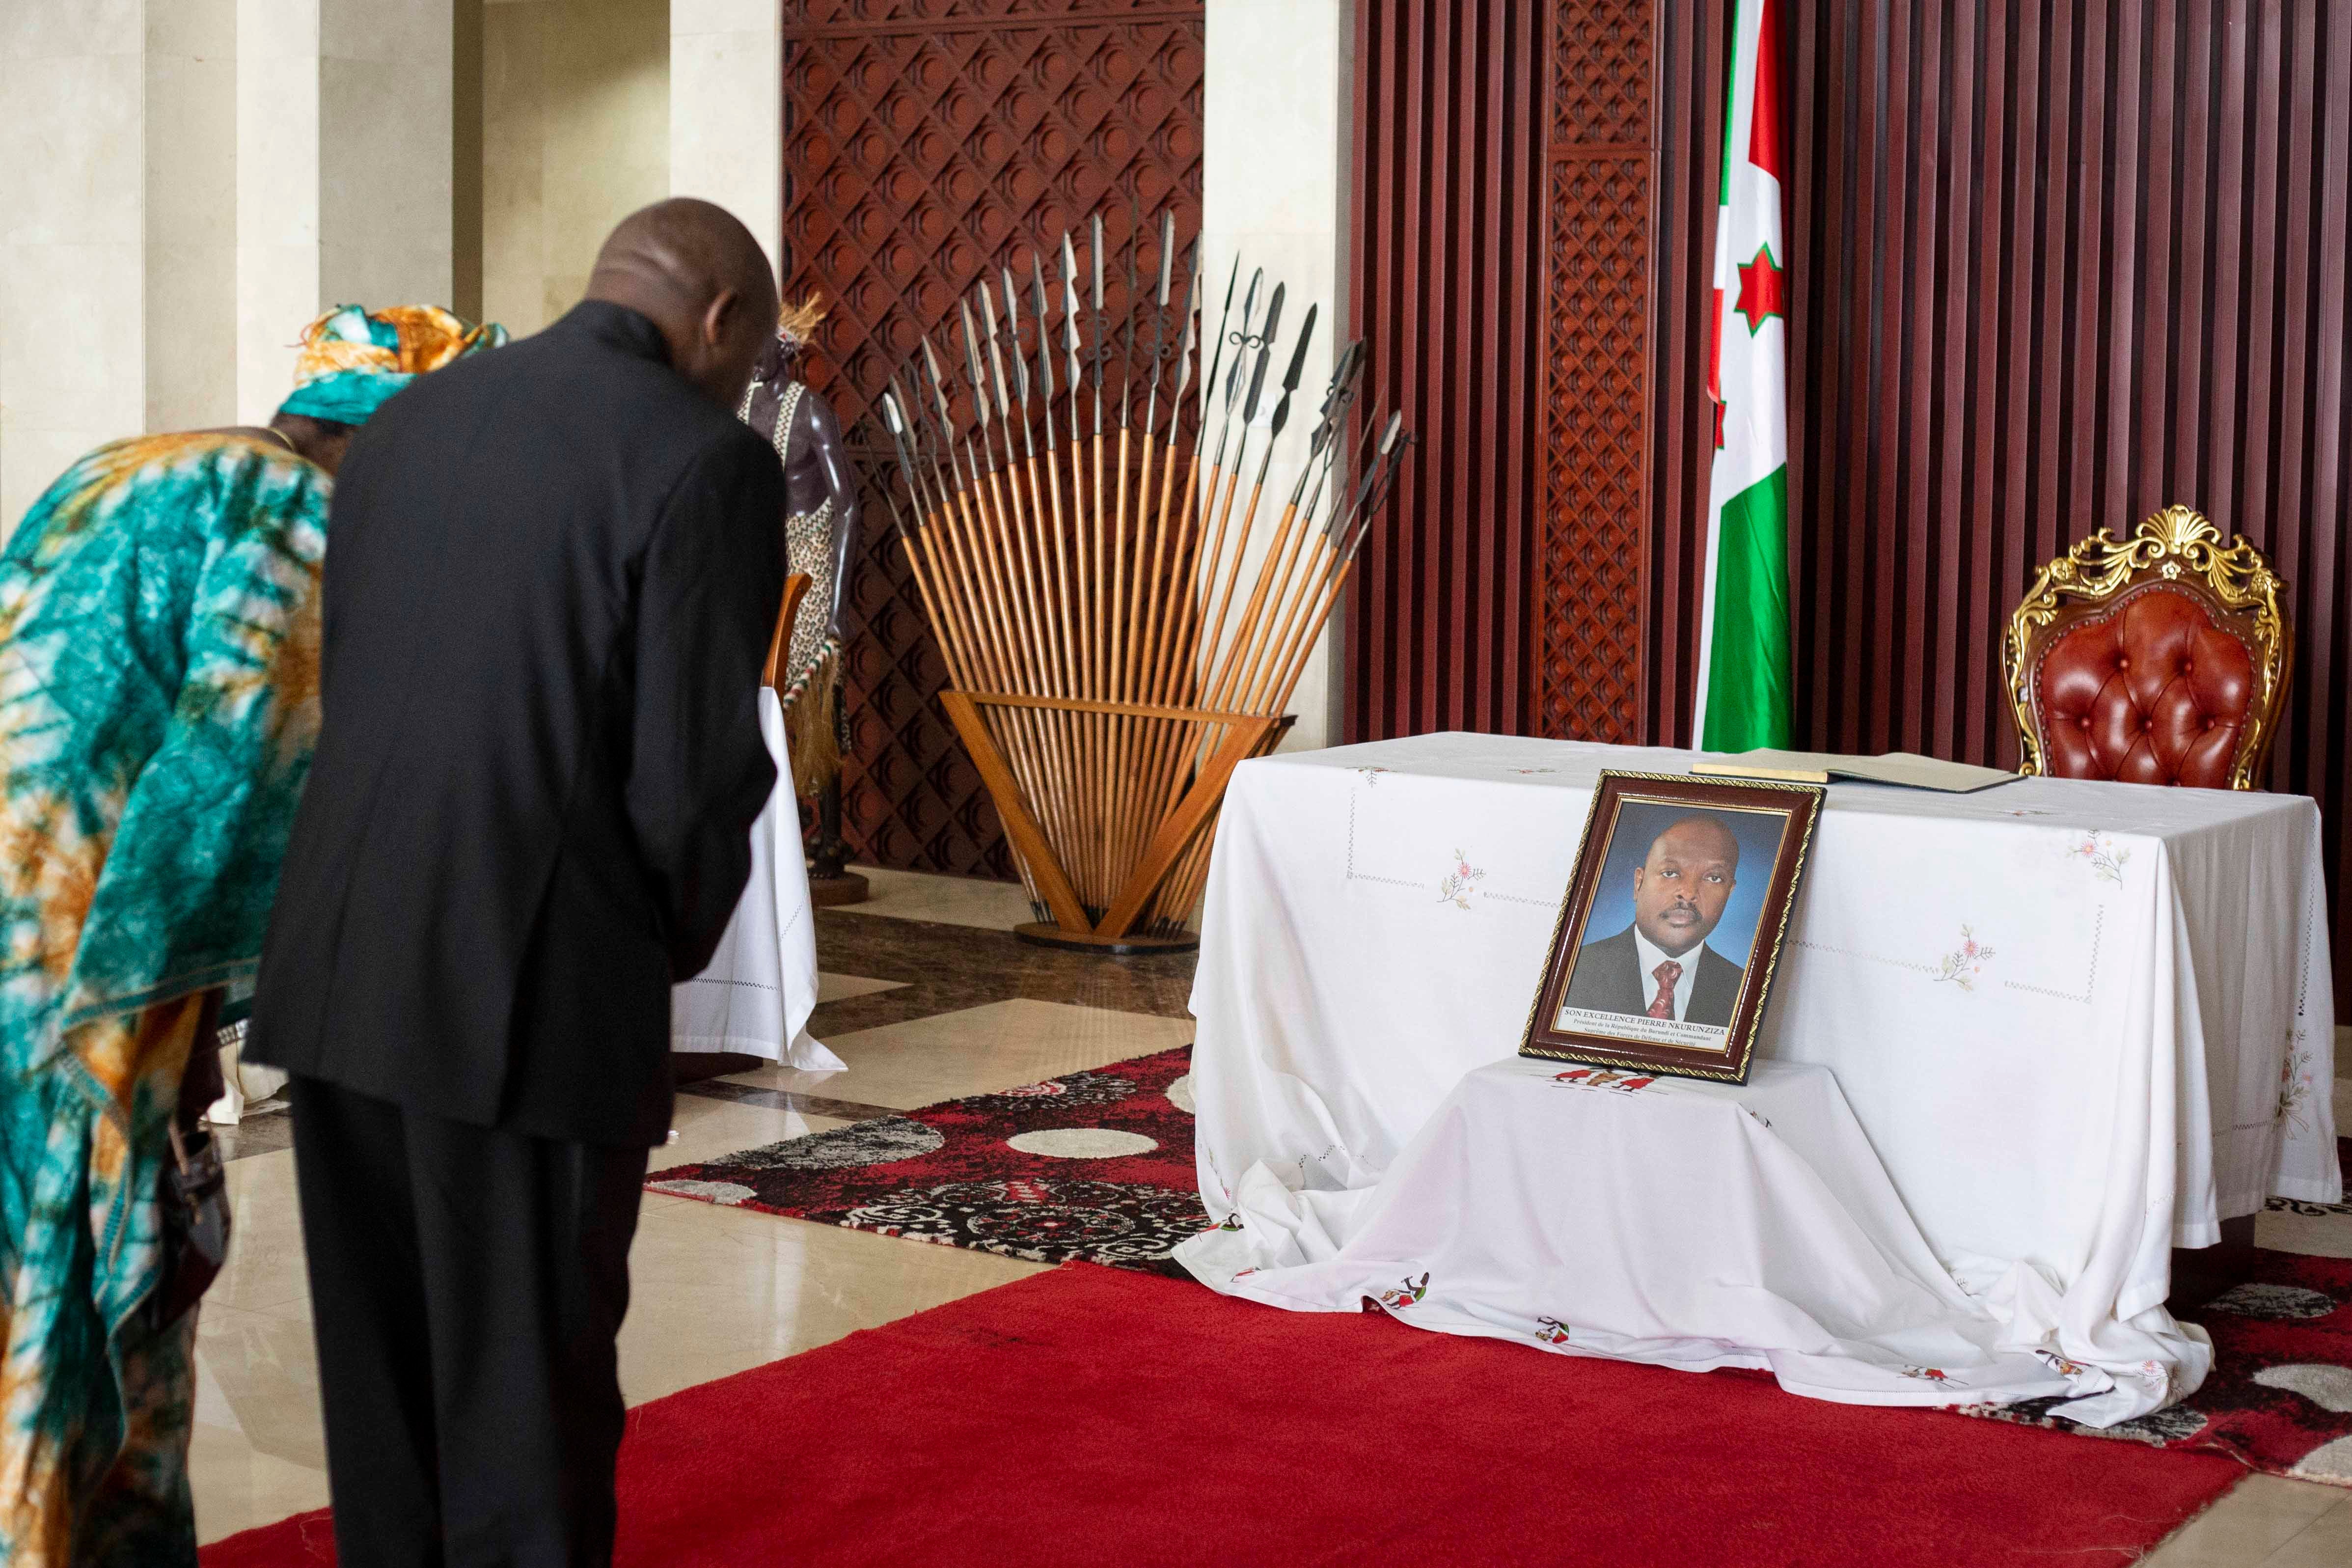 Burundi’s new president, Évariste Ndayishimiye, and his wife Angeline Ndayubaha pay their respects in front of a photograph of the late President Pierre Nkurunziza, at the presidential palace in Bujumbura, Burundi, on June 13, 2020.